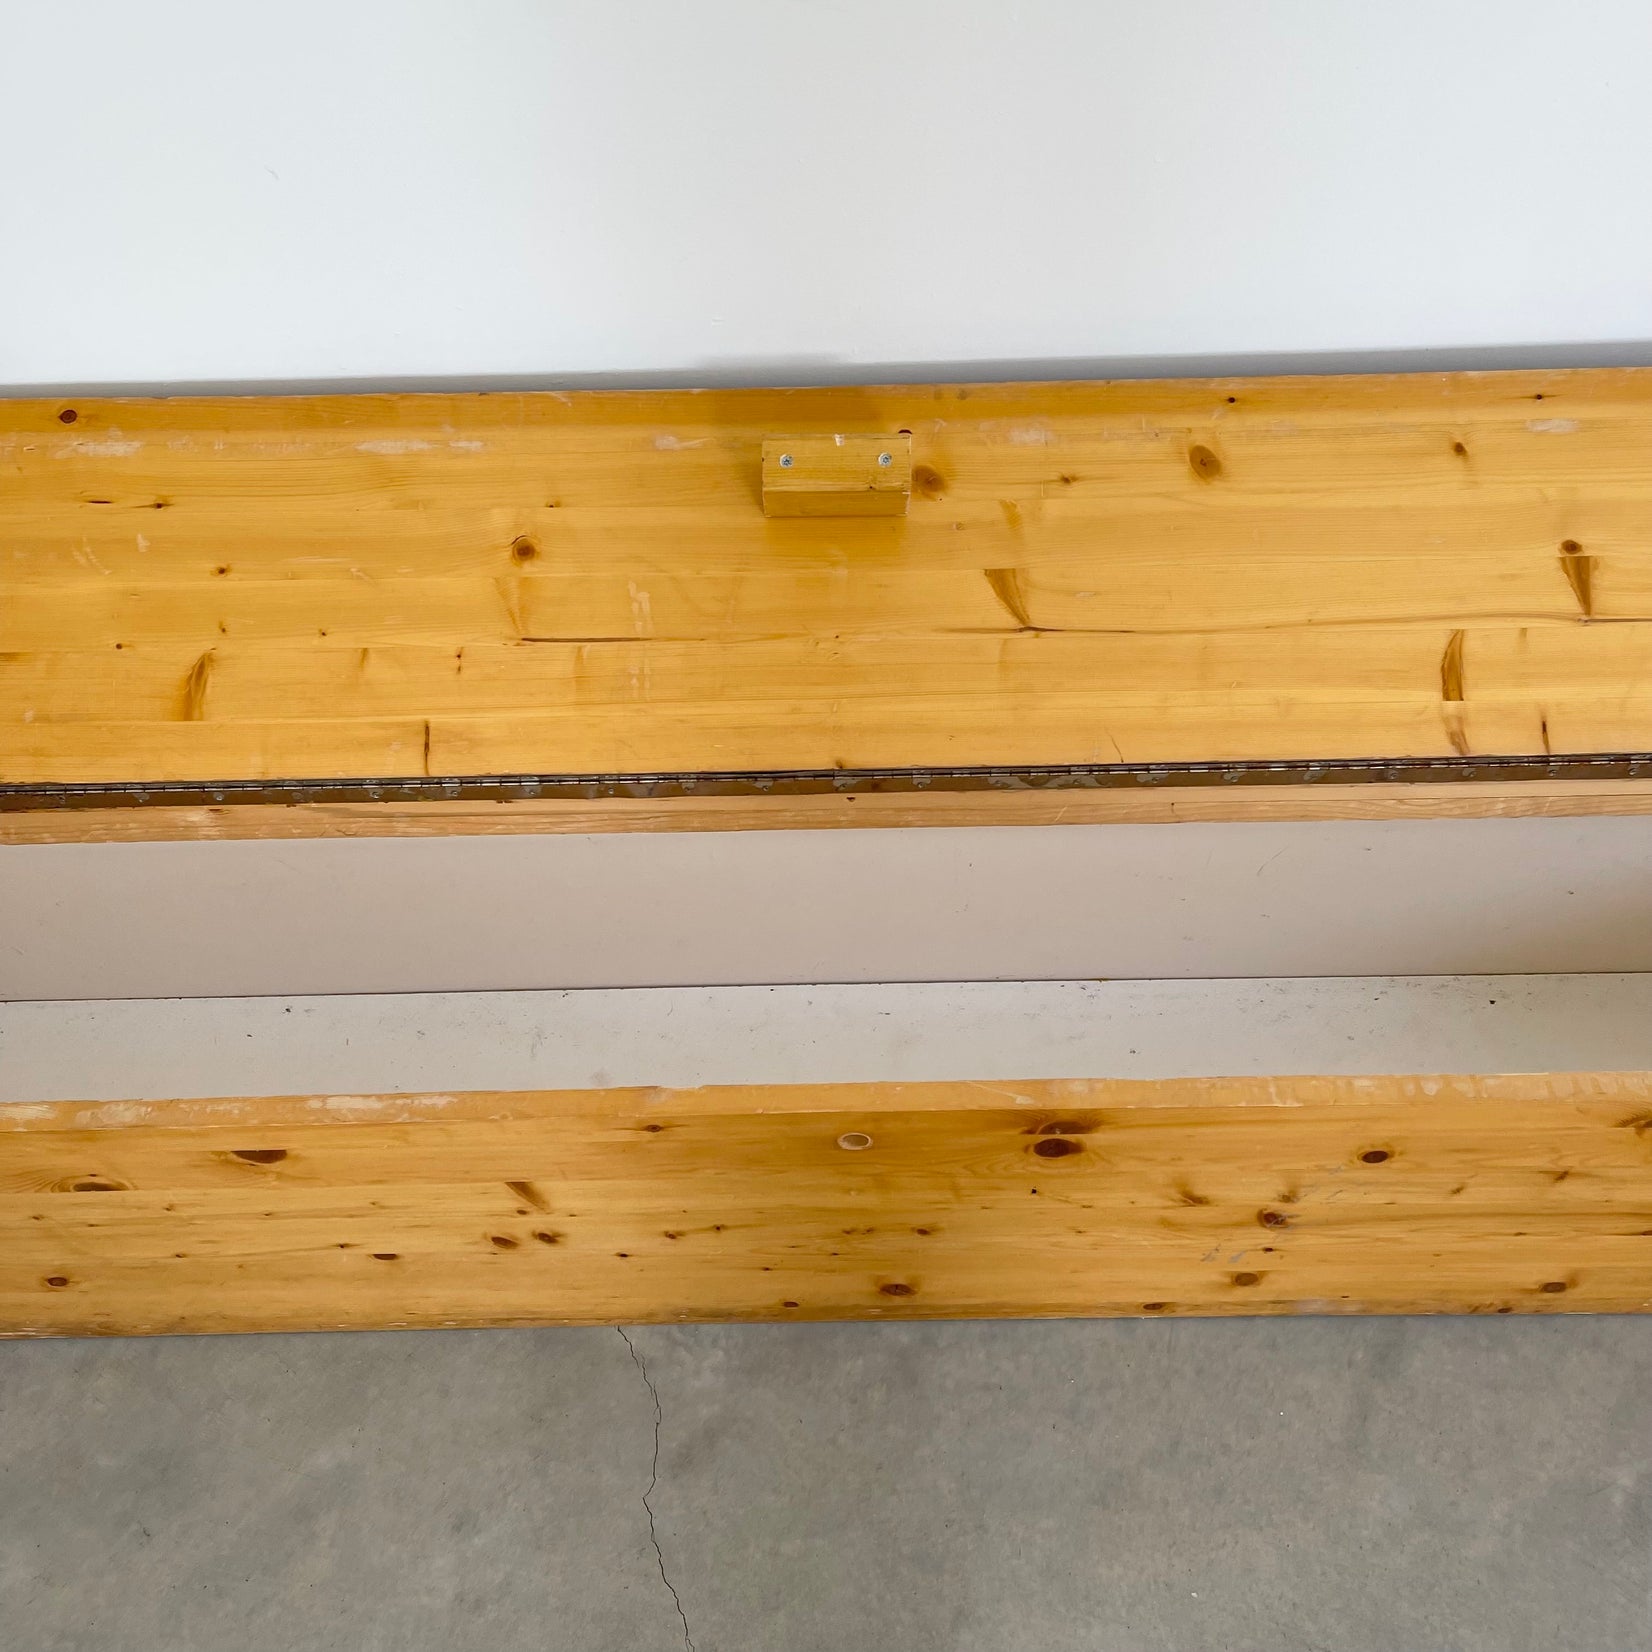 Monumental Charlotte Perriand Pine Storage Bench for Les Arcs, 1960s France